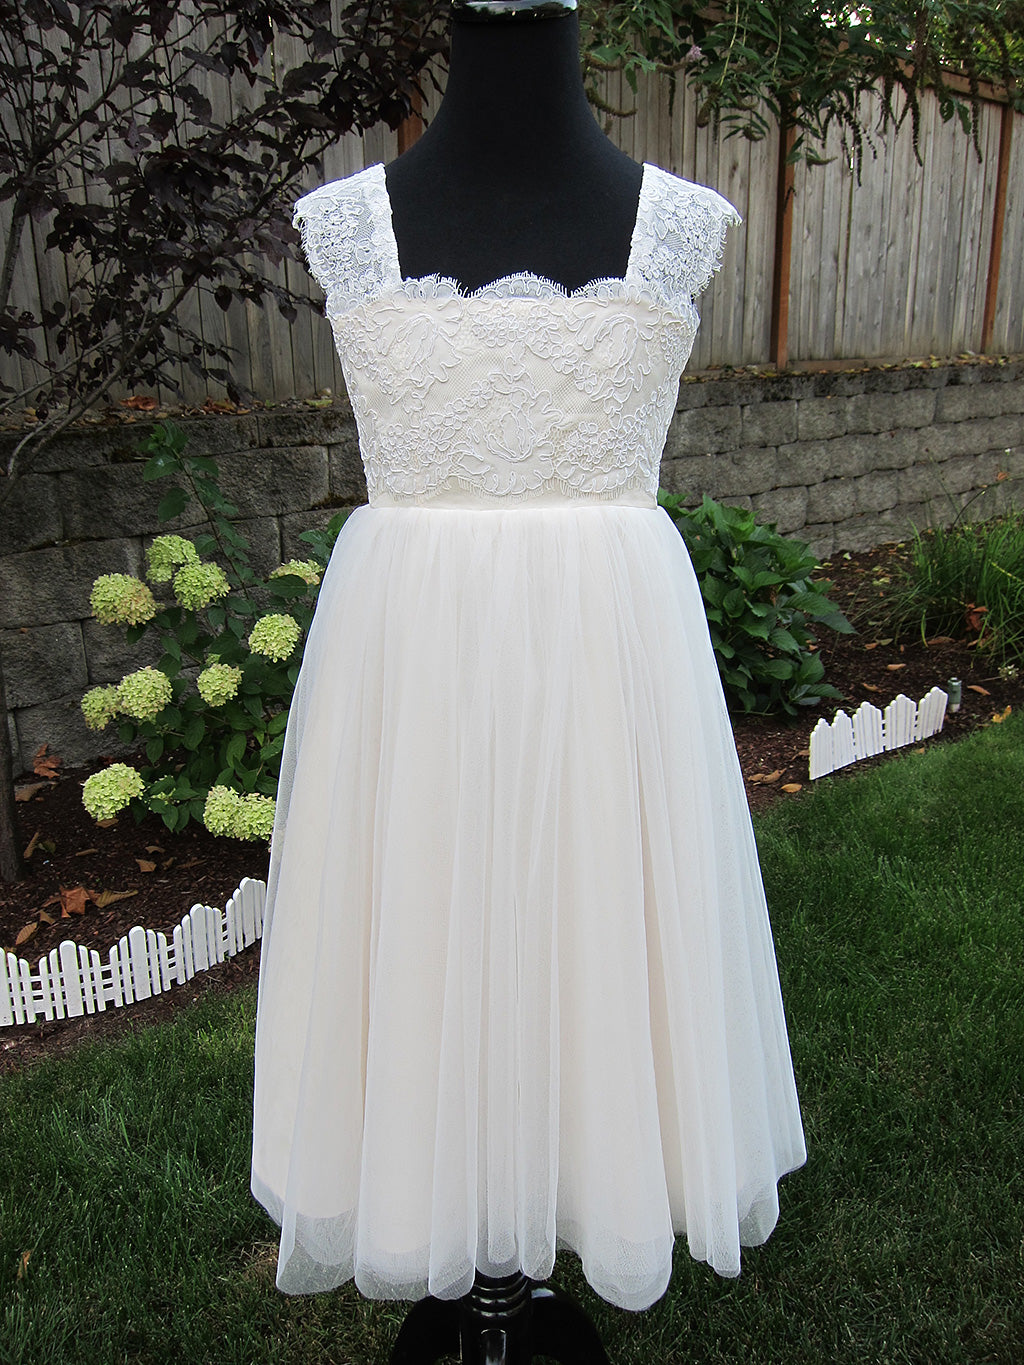 Champagne flower girl lace dress 003